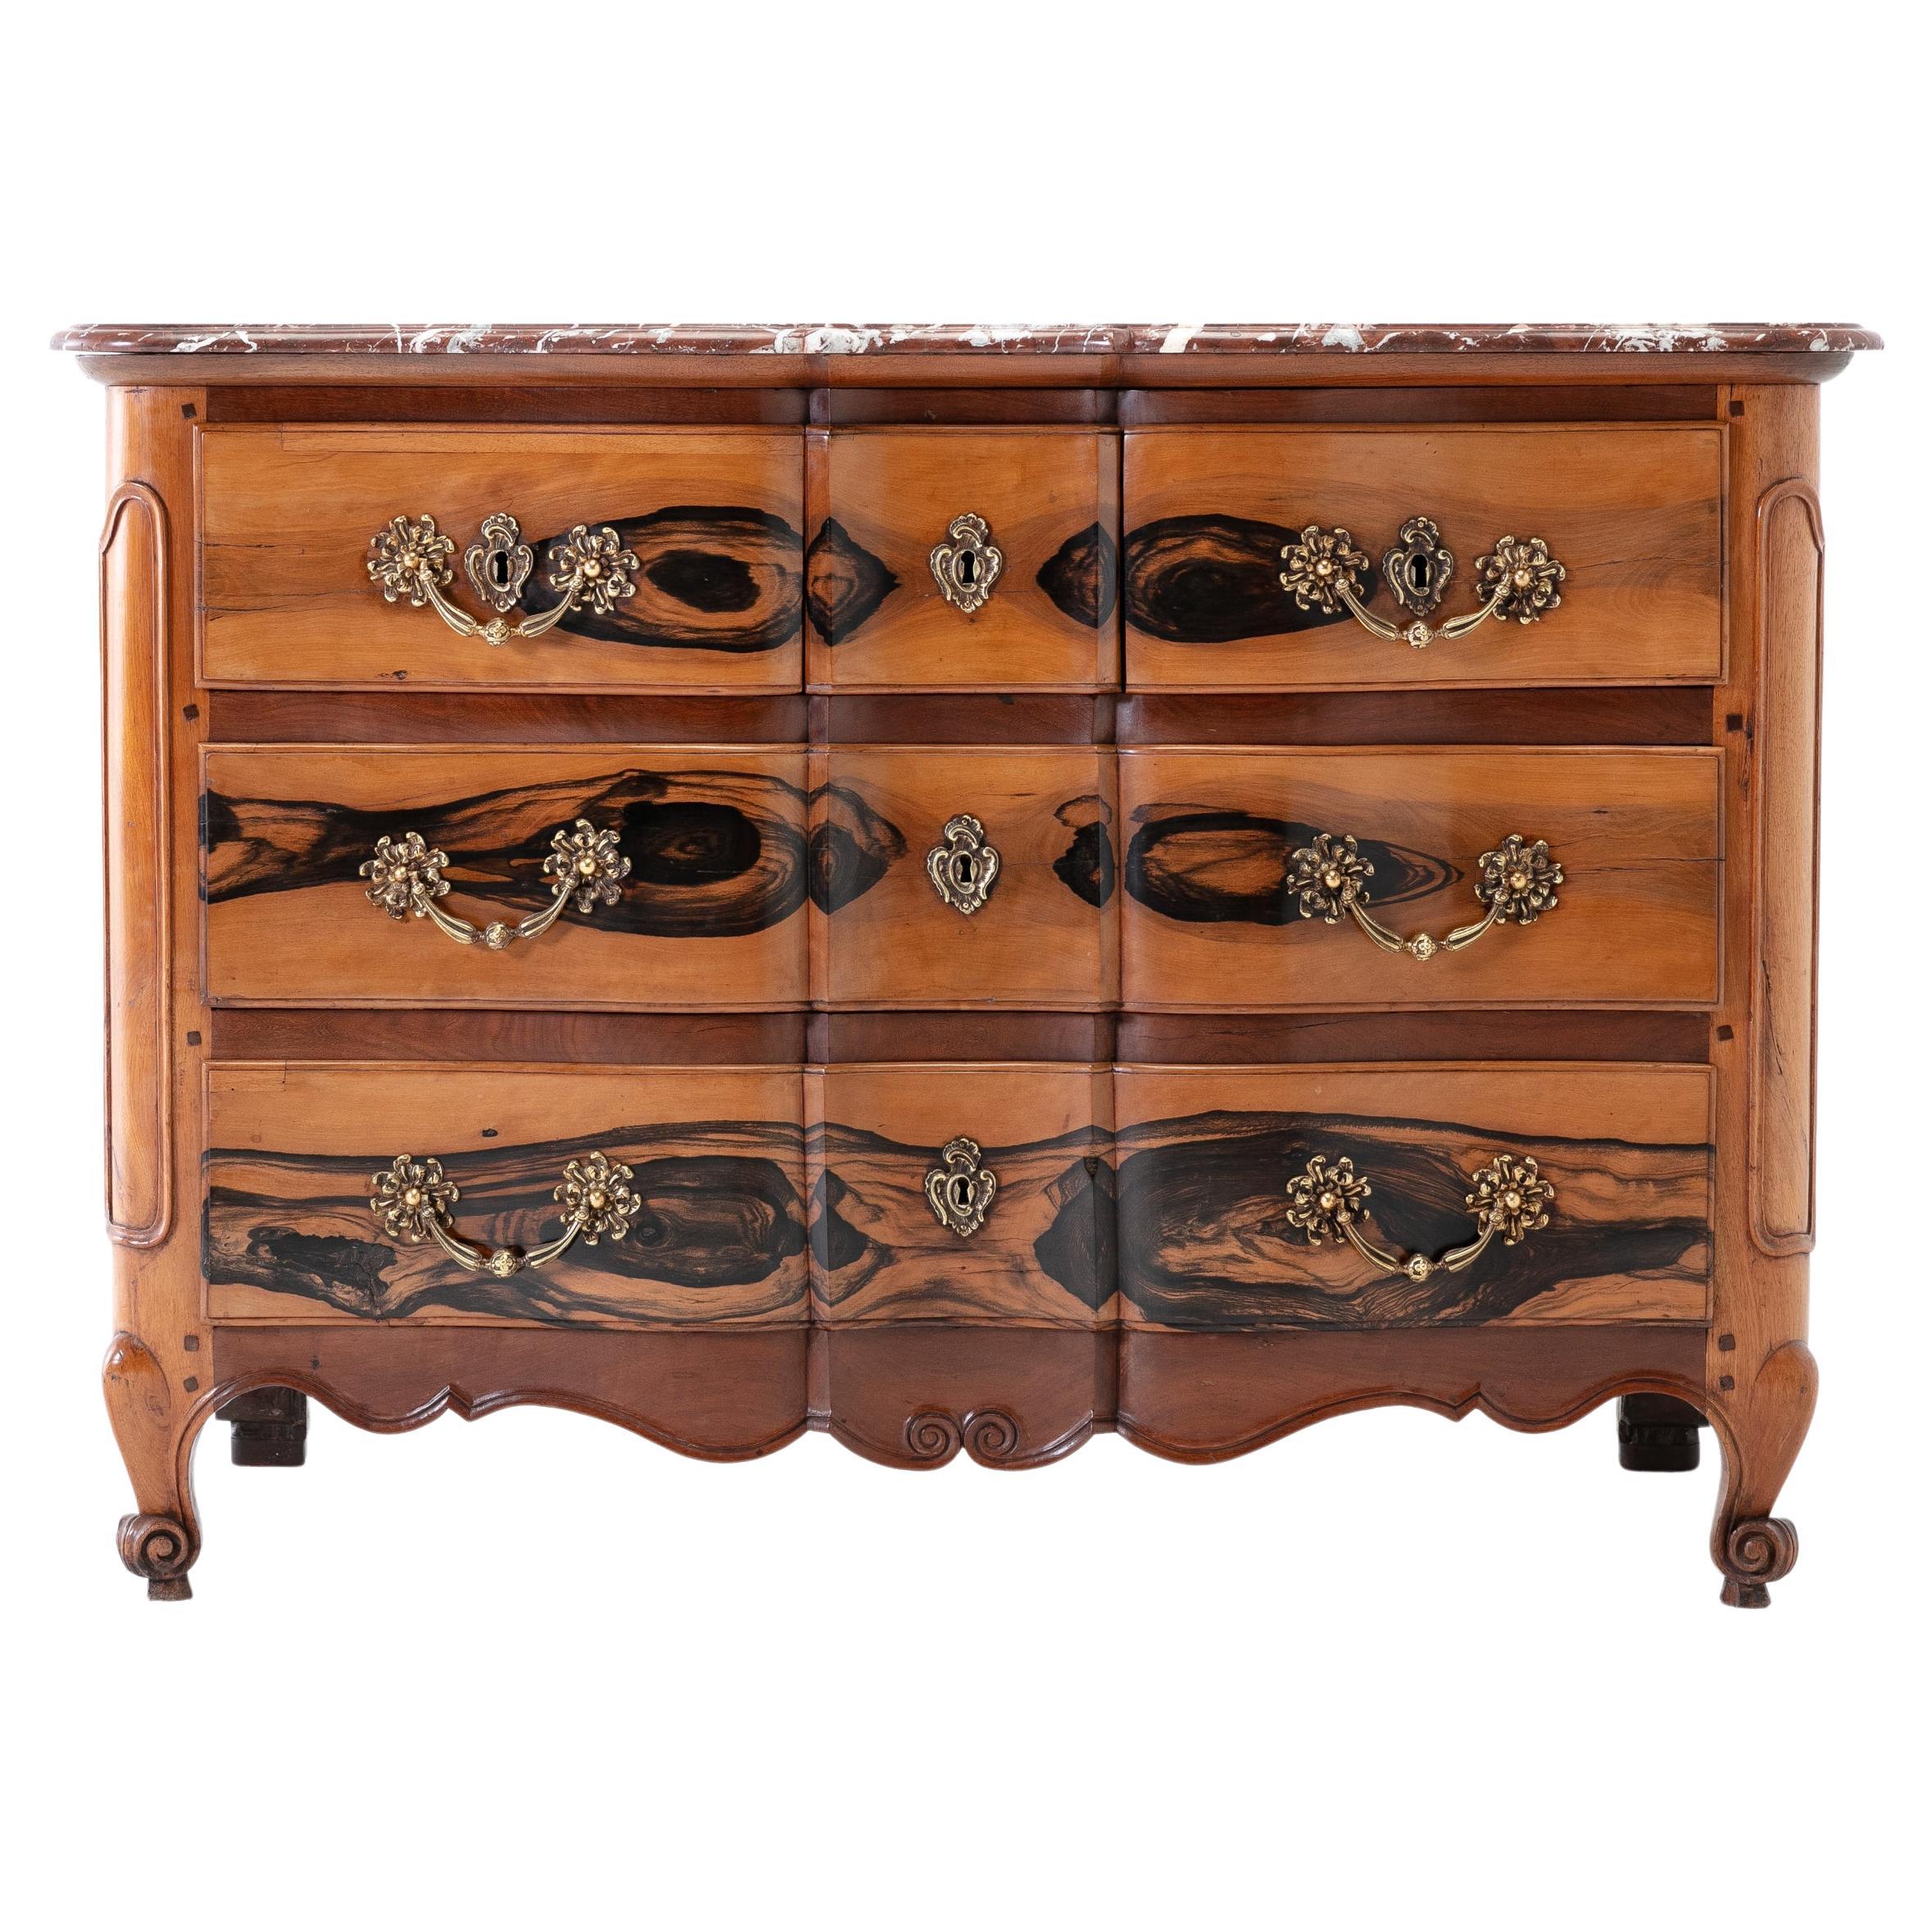 18th Century French Guaiac Wood and Walnut Commode